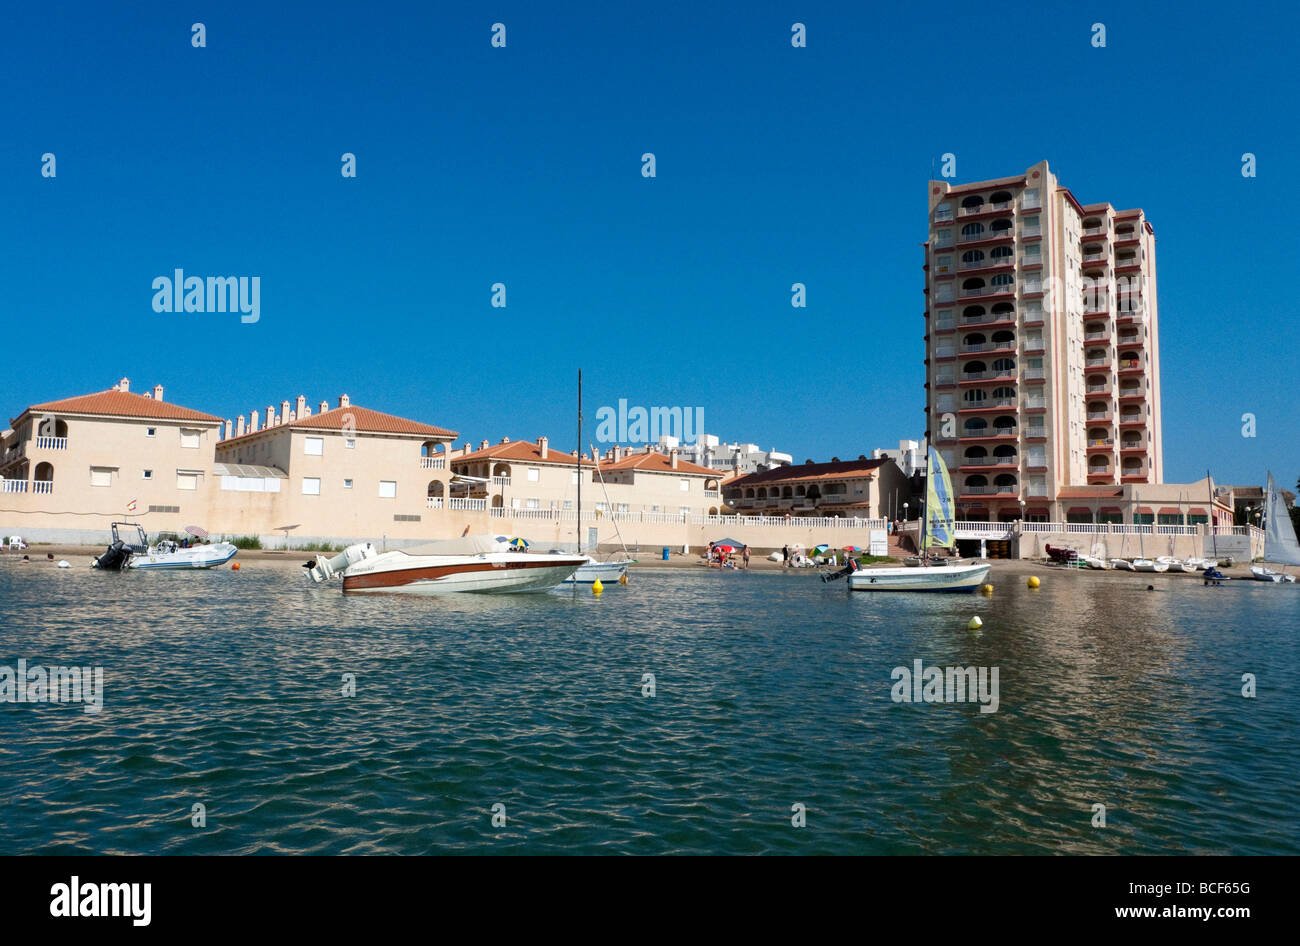 Apartments and beach by the Mar Menor (Inland Sea) in the region of Murcia, Spain Stock Photo